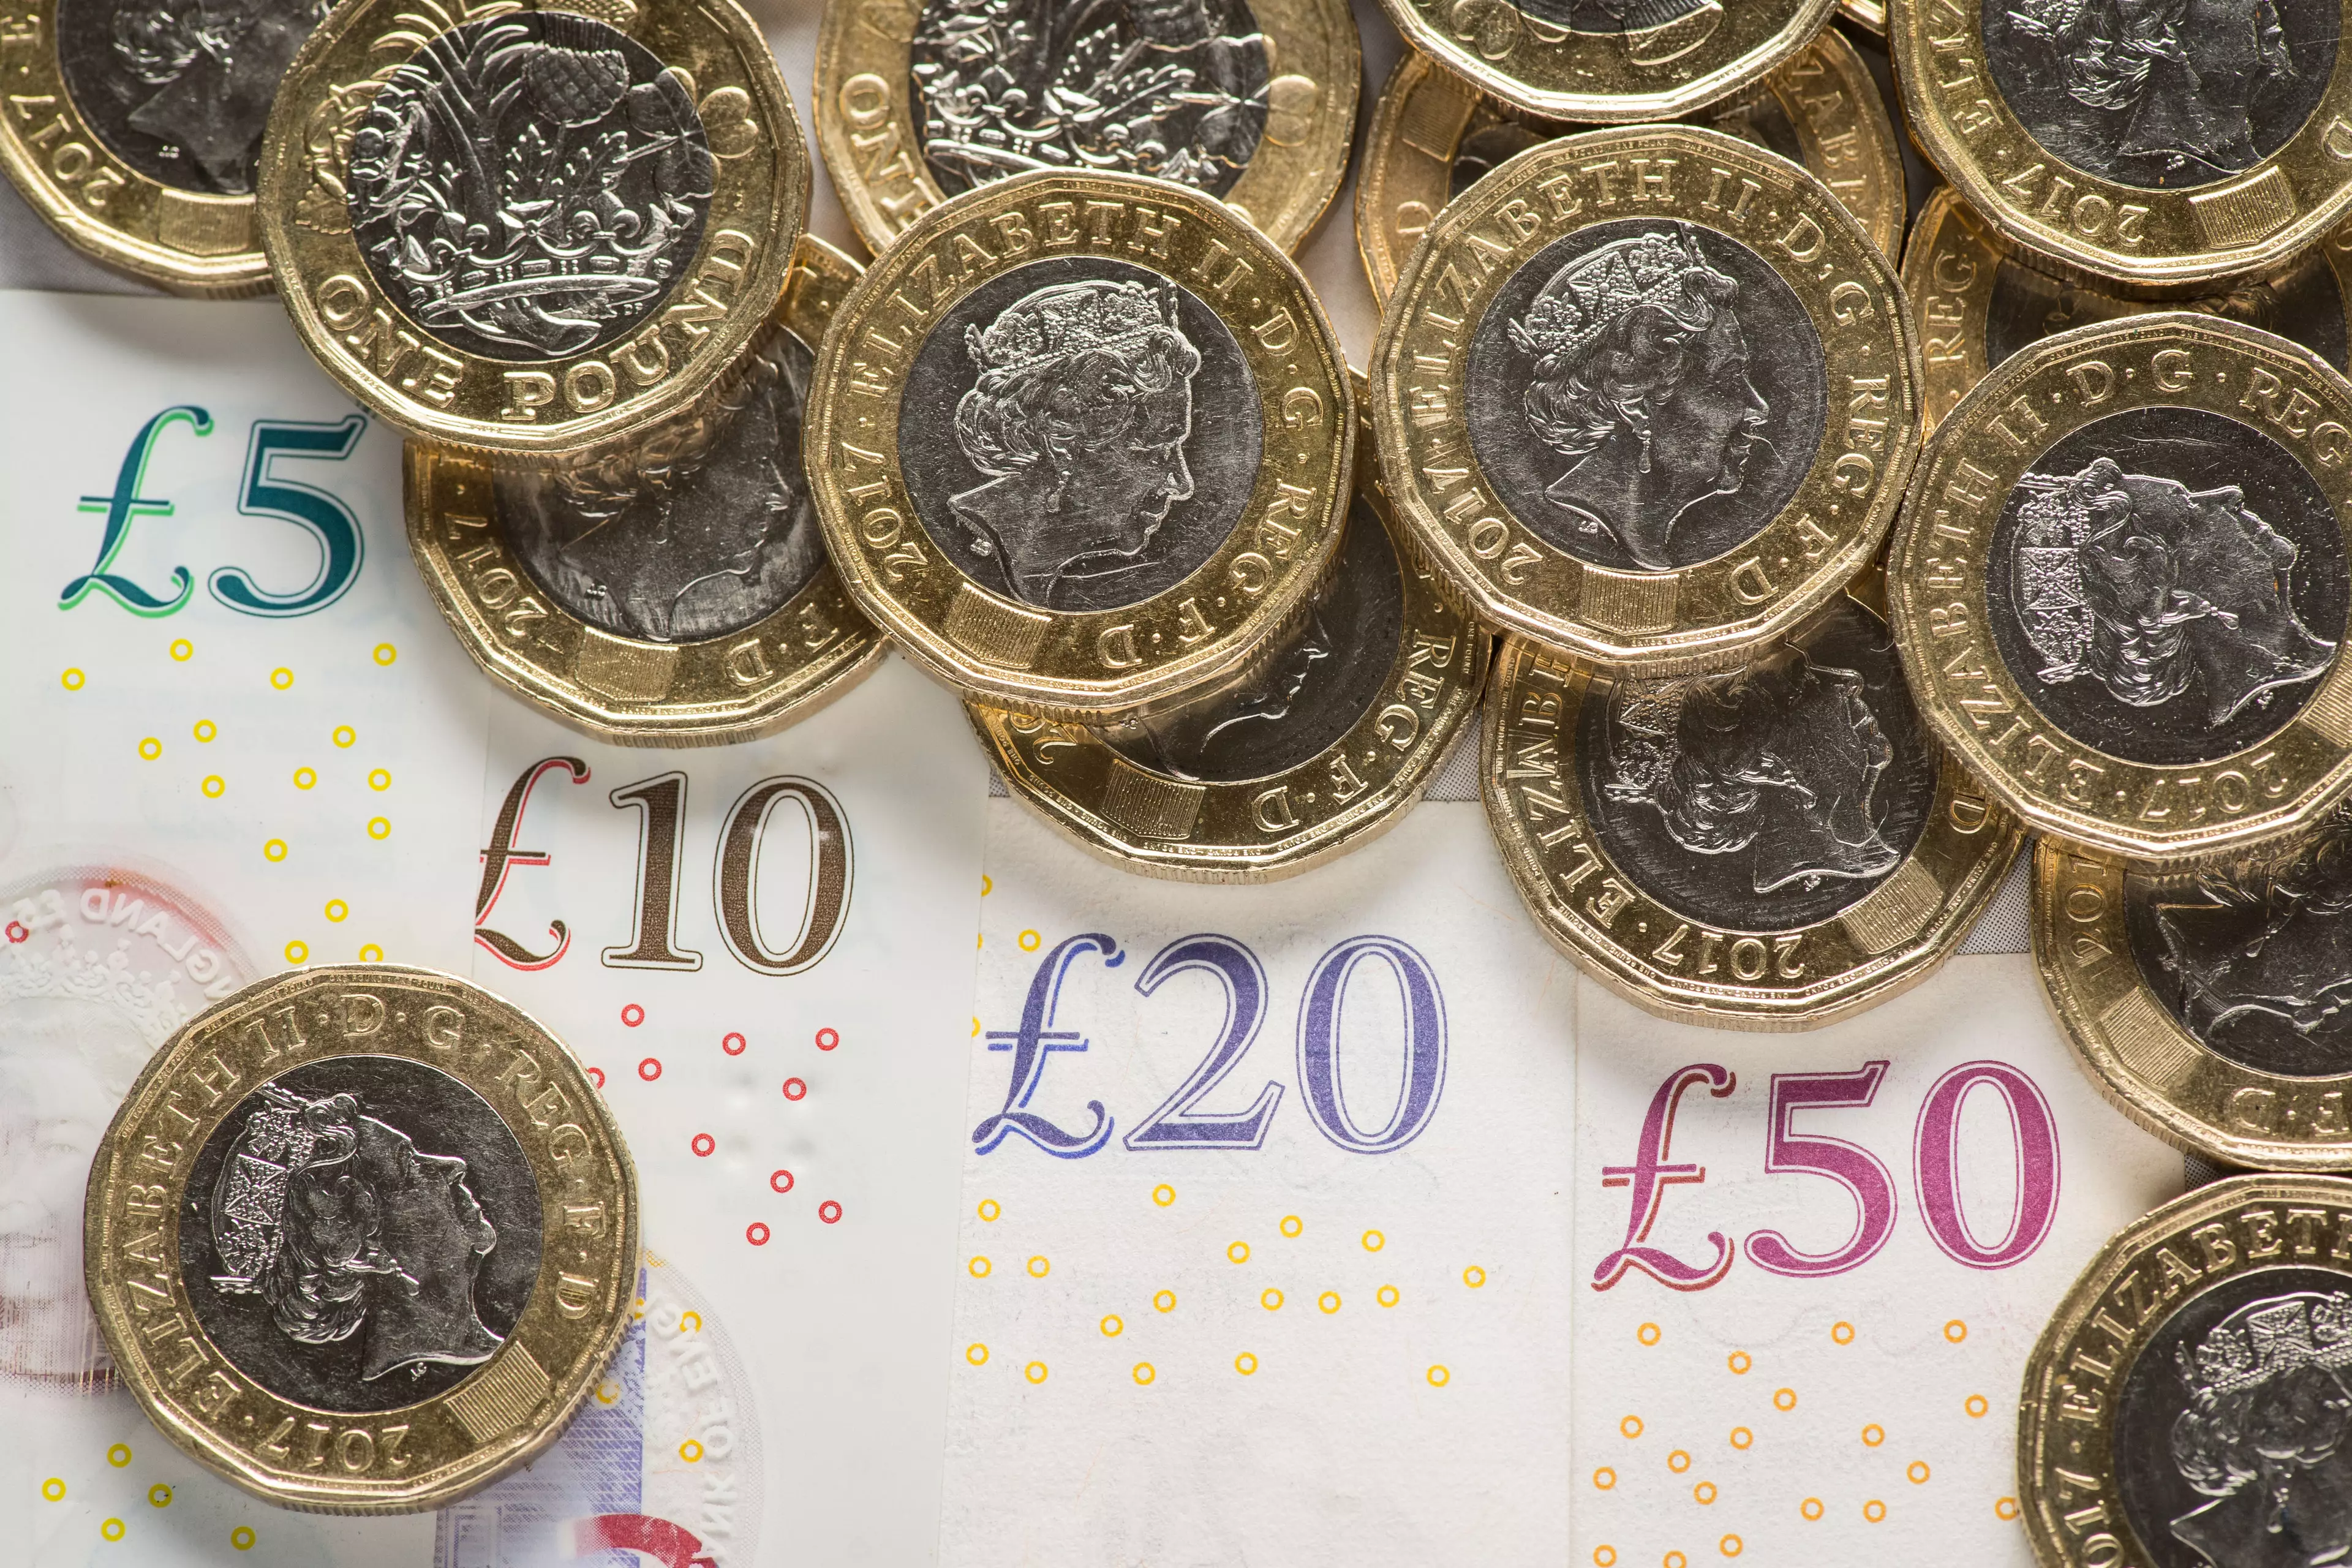 Many public sector workers will see their pay boosted by a £1,000 a year.